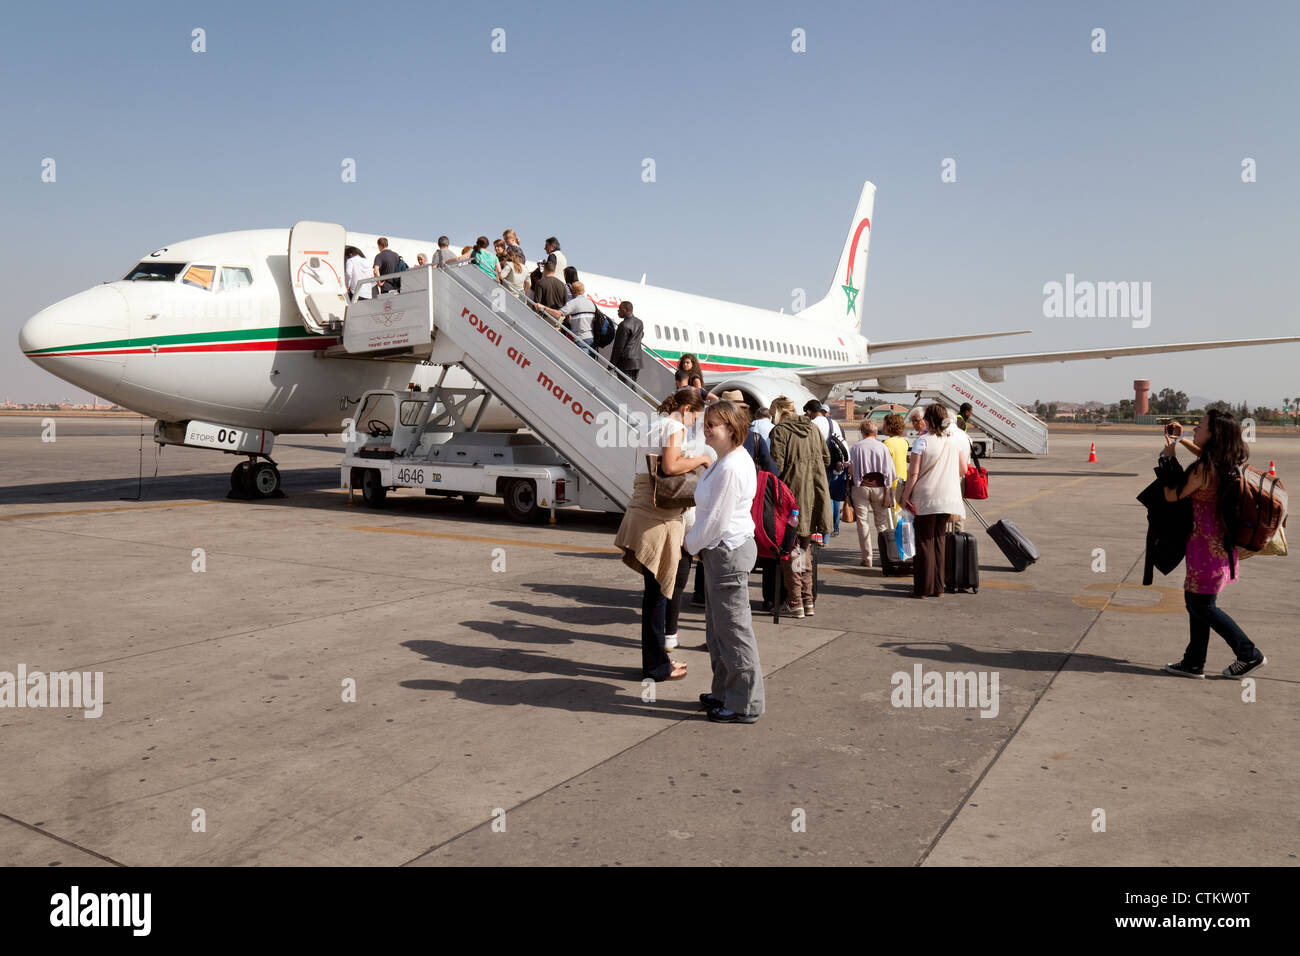 Passengers boarding a Royal Air Maroc plane at Marrakech airport morocco africa Stock Photo